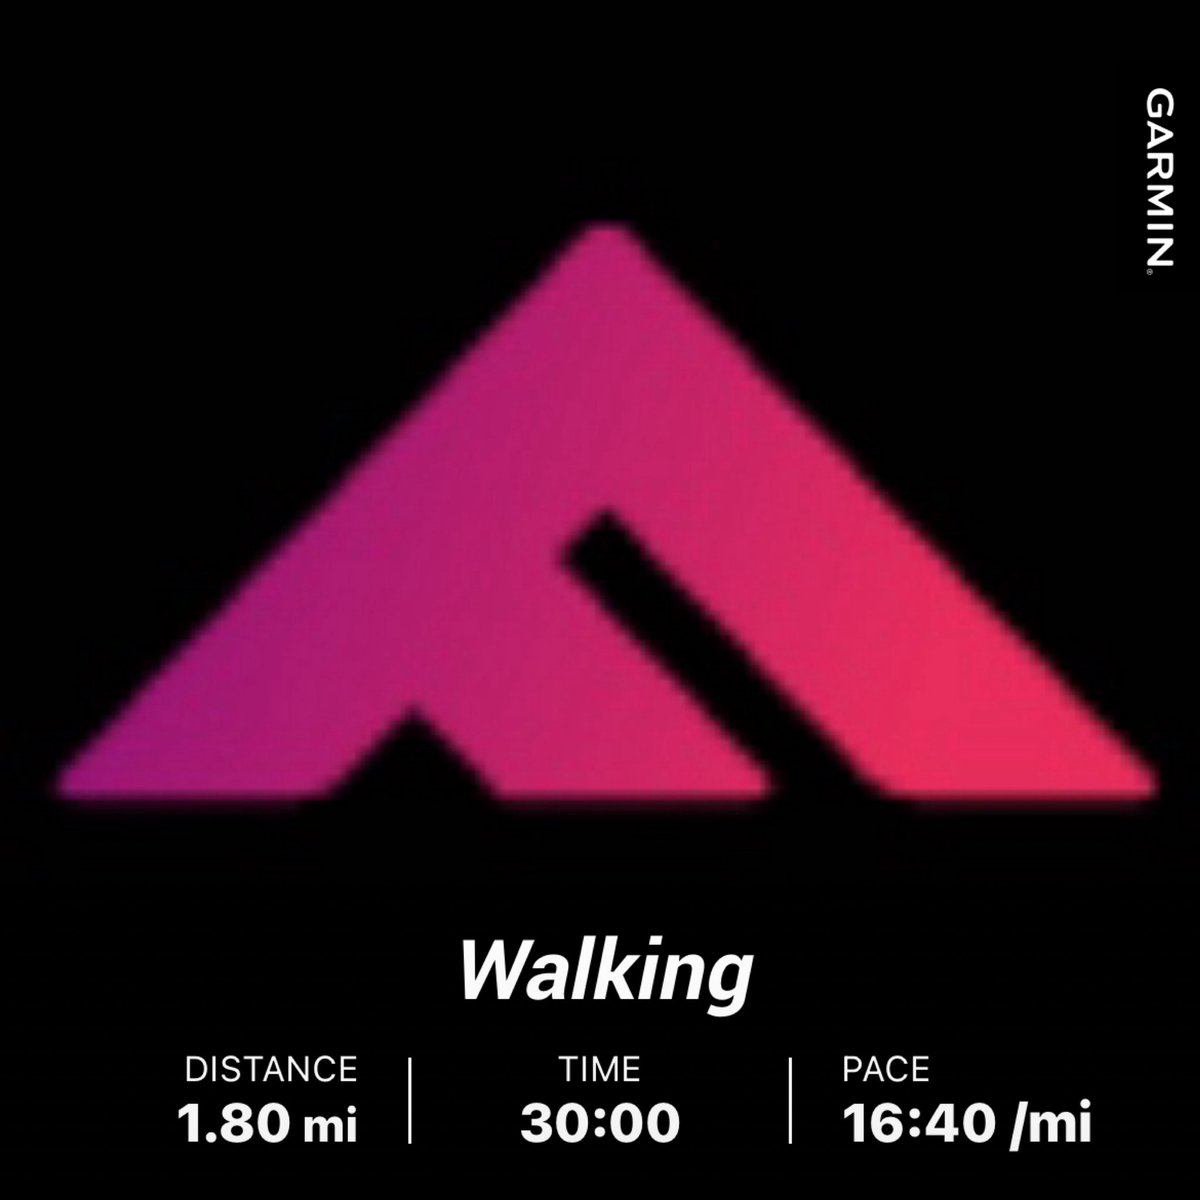 Starting the day with 4500 steps #wristrecovery 30 minutes 🏃🏻‍♀️10 minutes 🙆🏻‍♀️ #justmove #LetsGetFitAESD #FitLeaders #4AMcrew @PrincipalRoRod @zjgalvan @Asael_Ruvalcaba @DrRenaeBryant @ValChavez2018 @fit_leader @DiocelinaBelle @LorenaRubio123